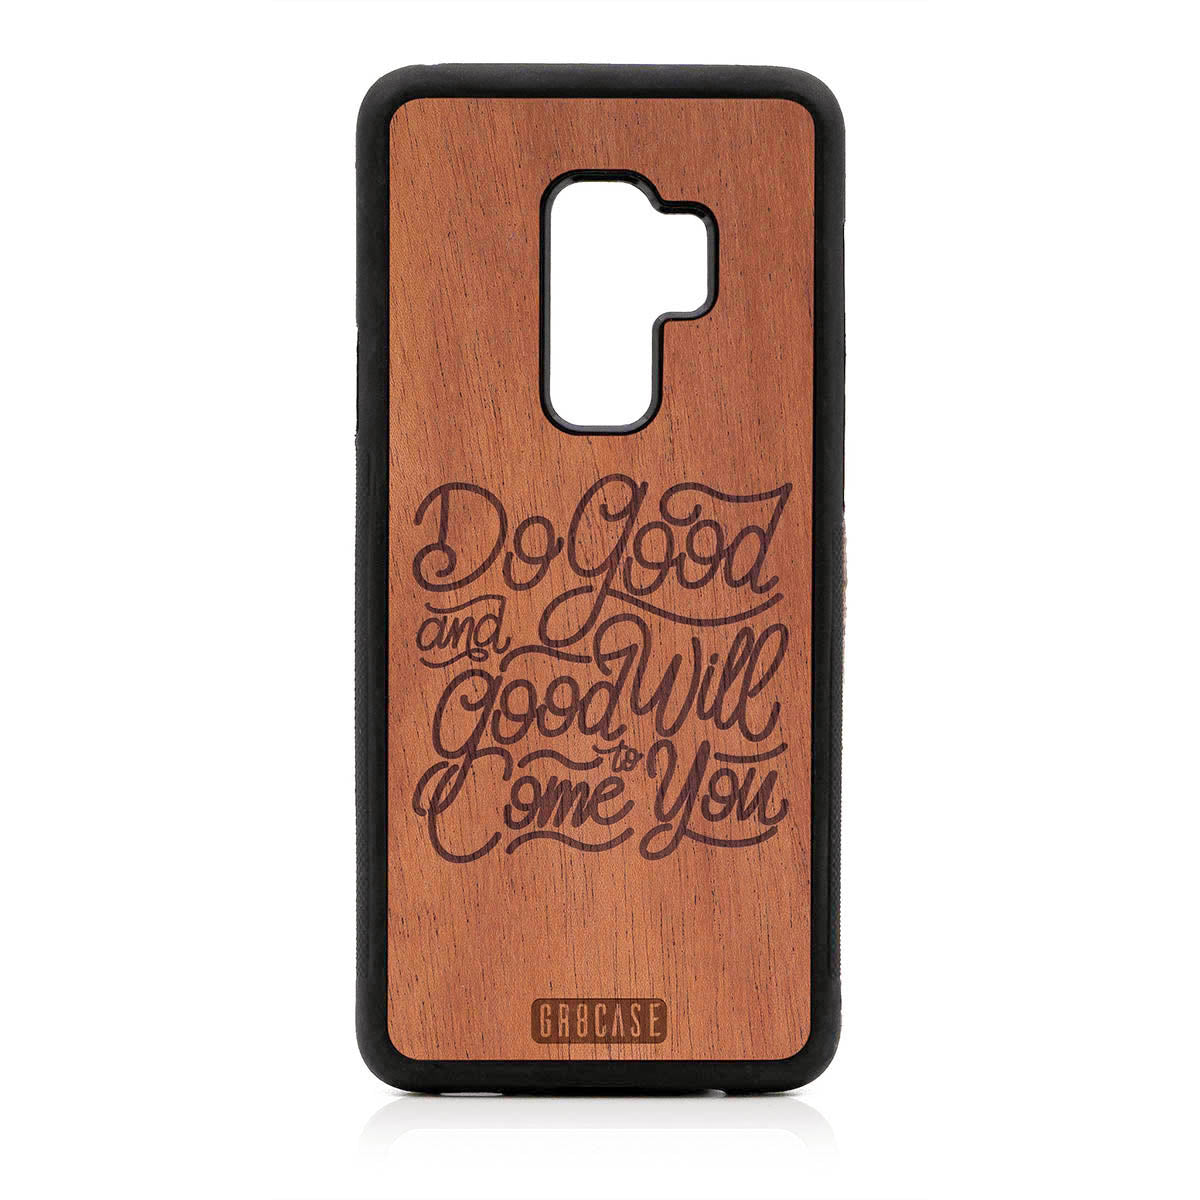 Do Good And Good Will Come To You Design Wood Case For Samsung Galaxy S9 Plus by GR8CASE